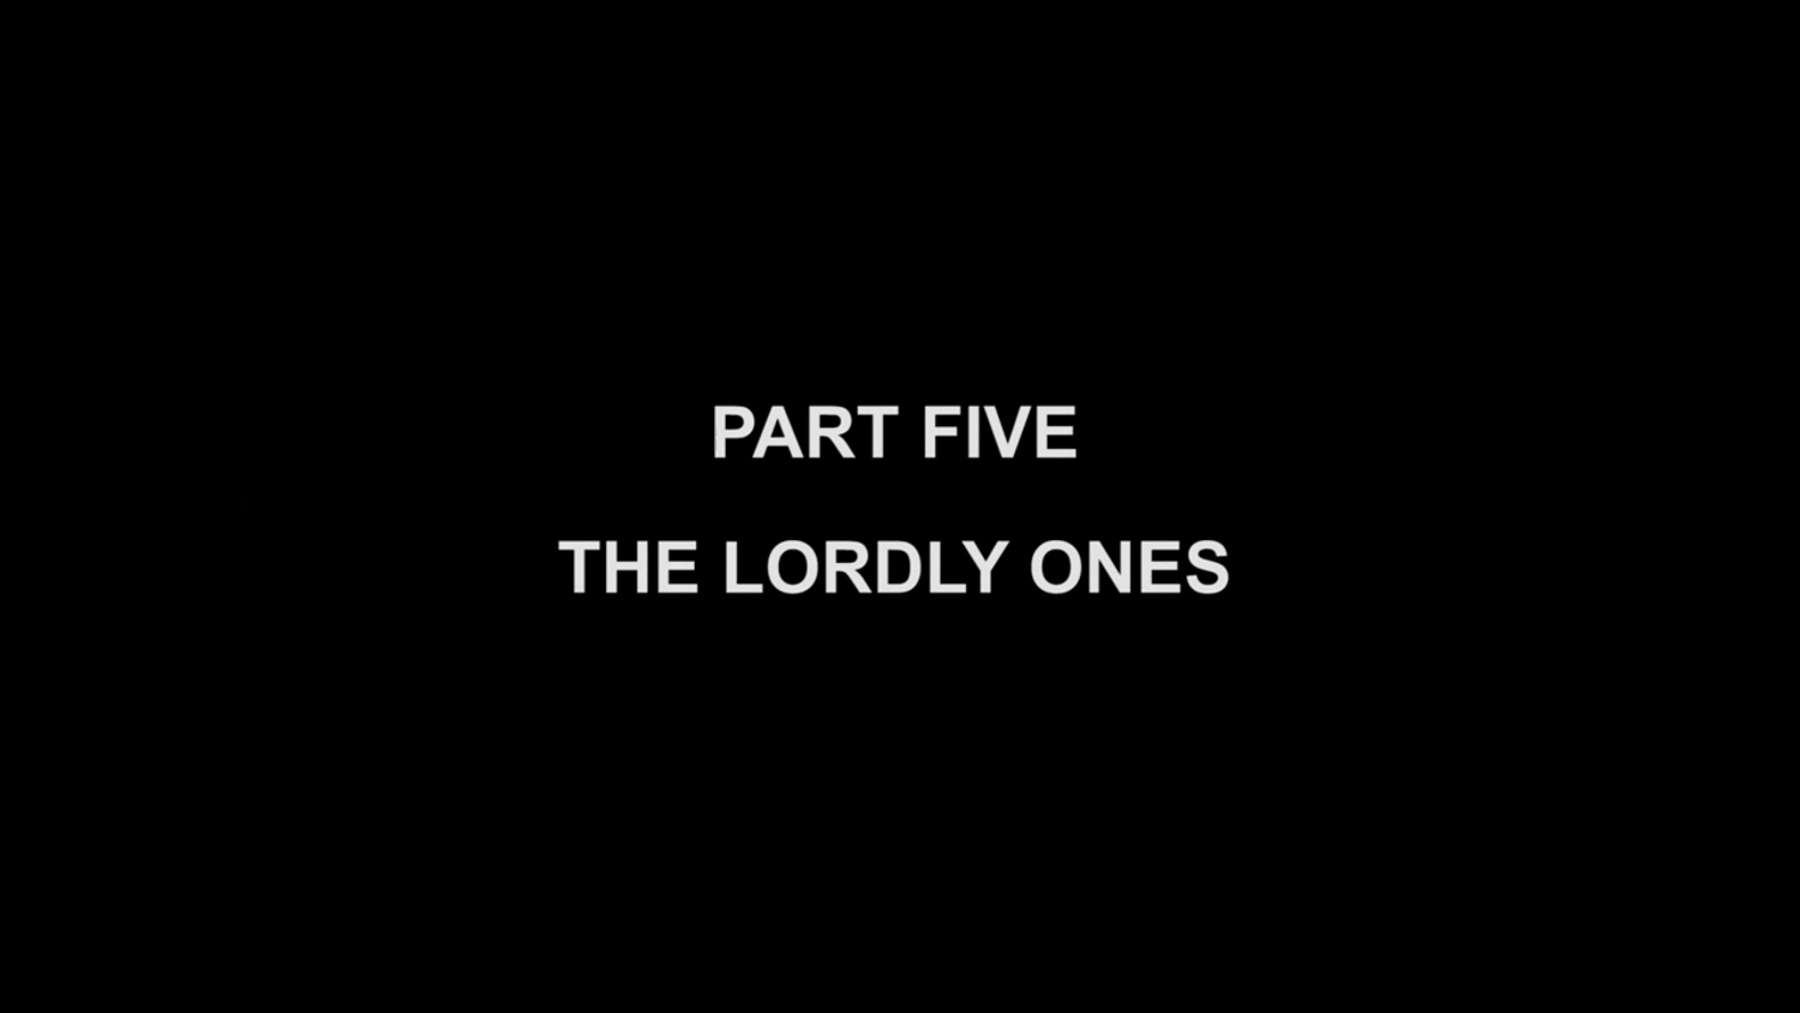 Can't Get You Out of My Head: The Lordly Ones | Season 1 | Episode 5